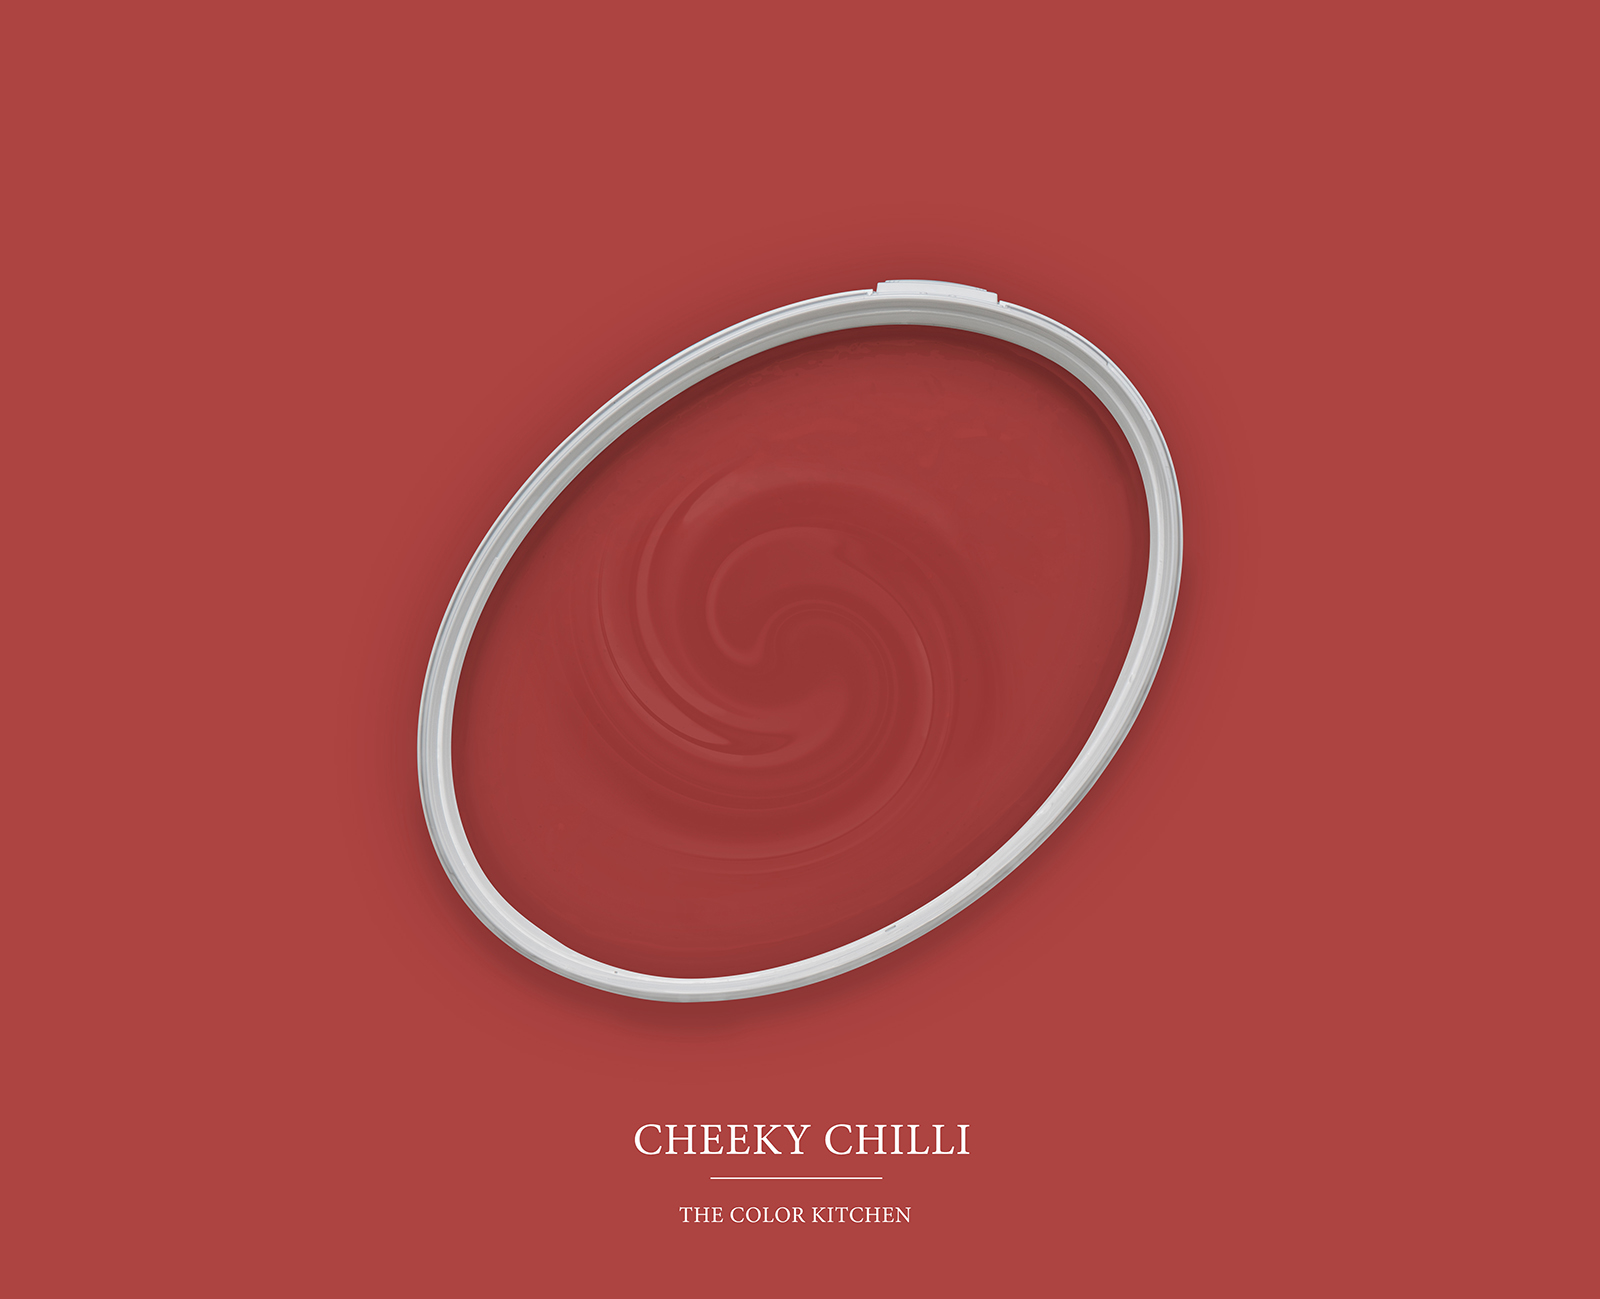 Wall Paint TCK7005 »Cheeky Chilli« in strong fire red – 5.0 litre
